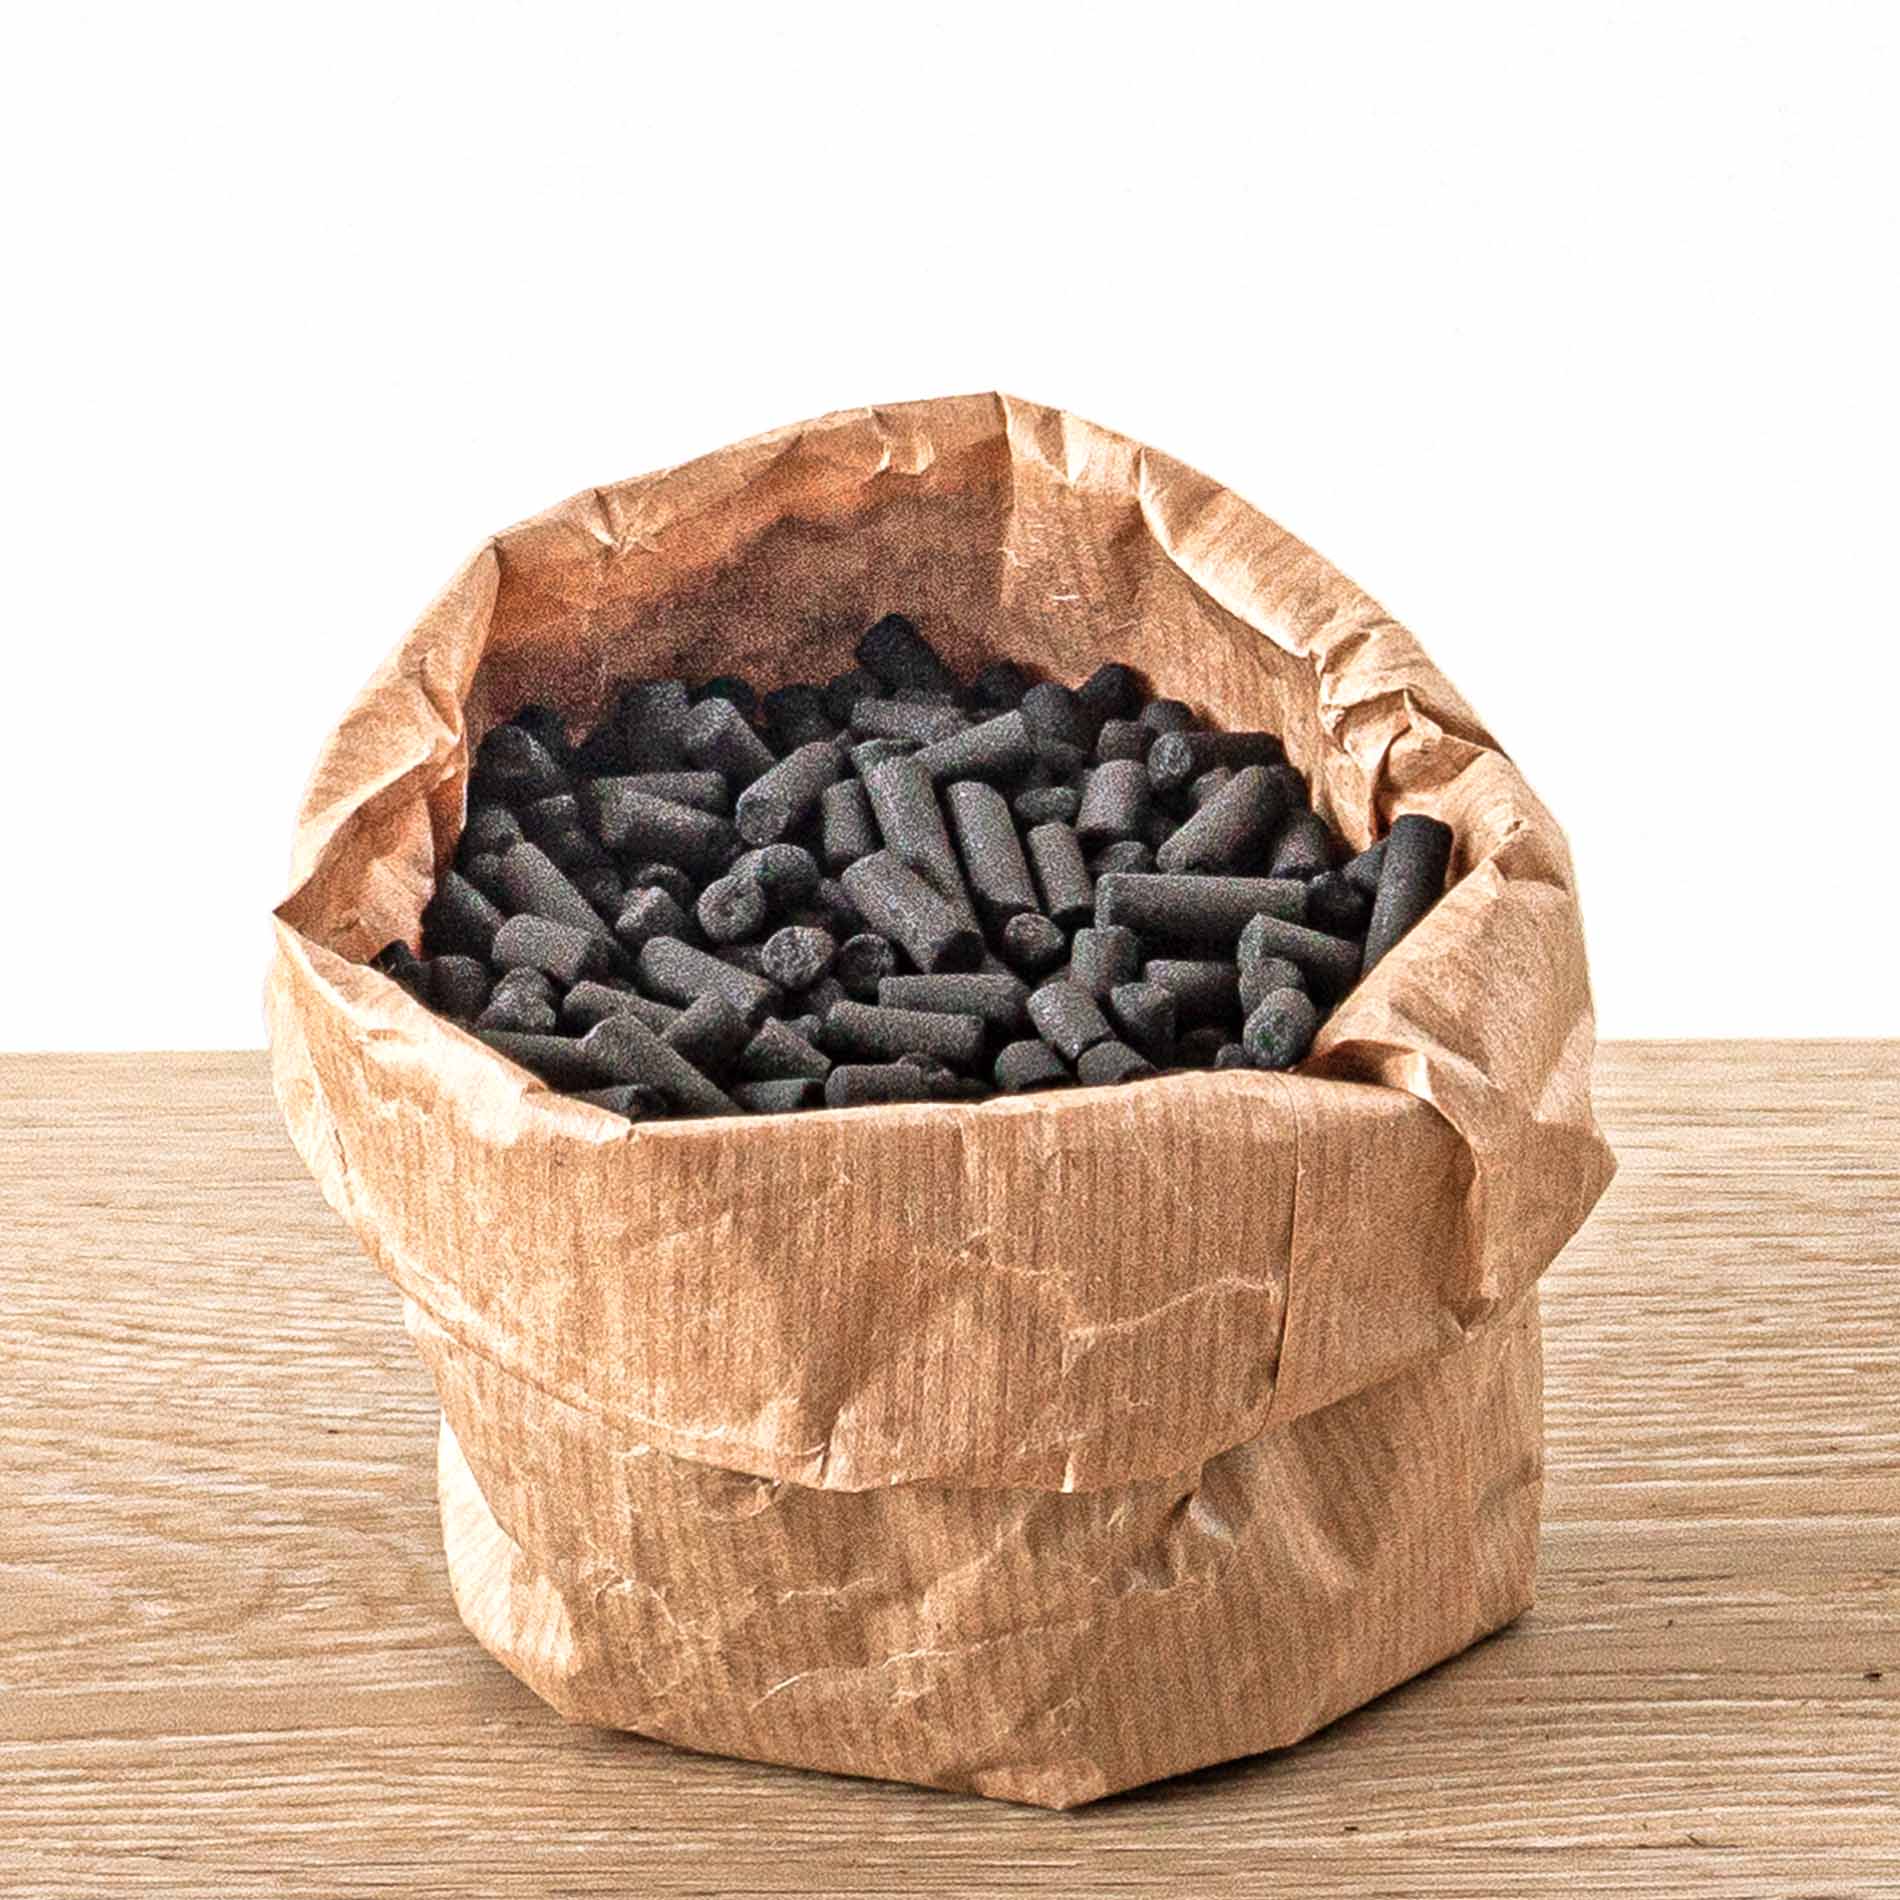 Activated Carbon Charcoal- 25 lbs